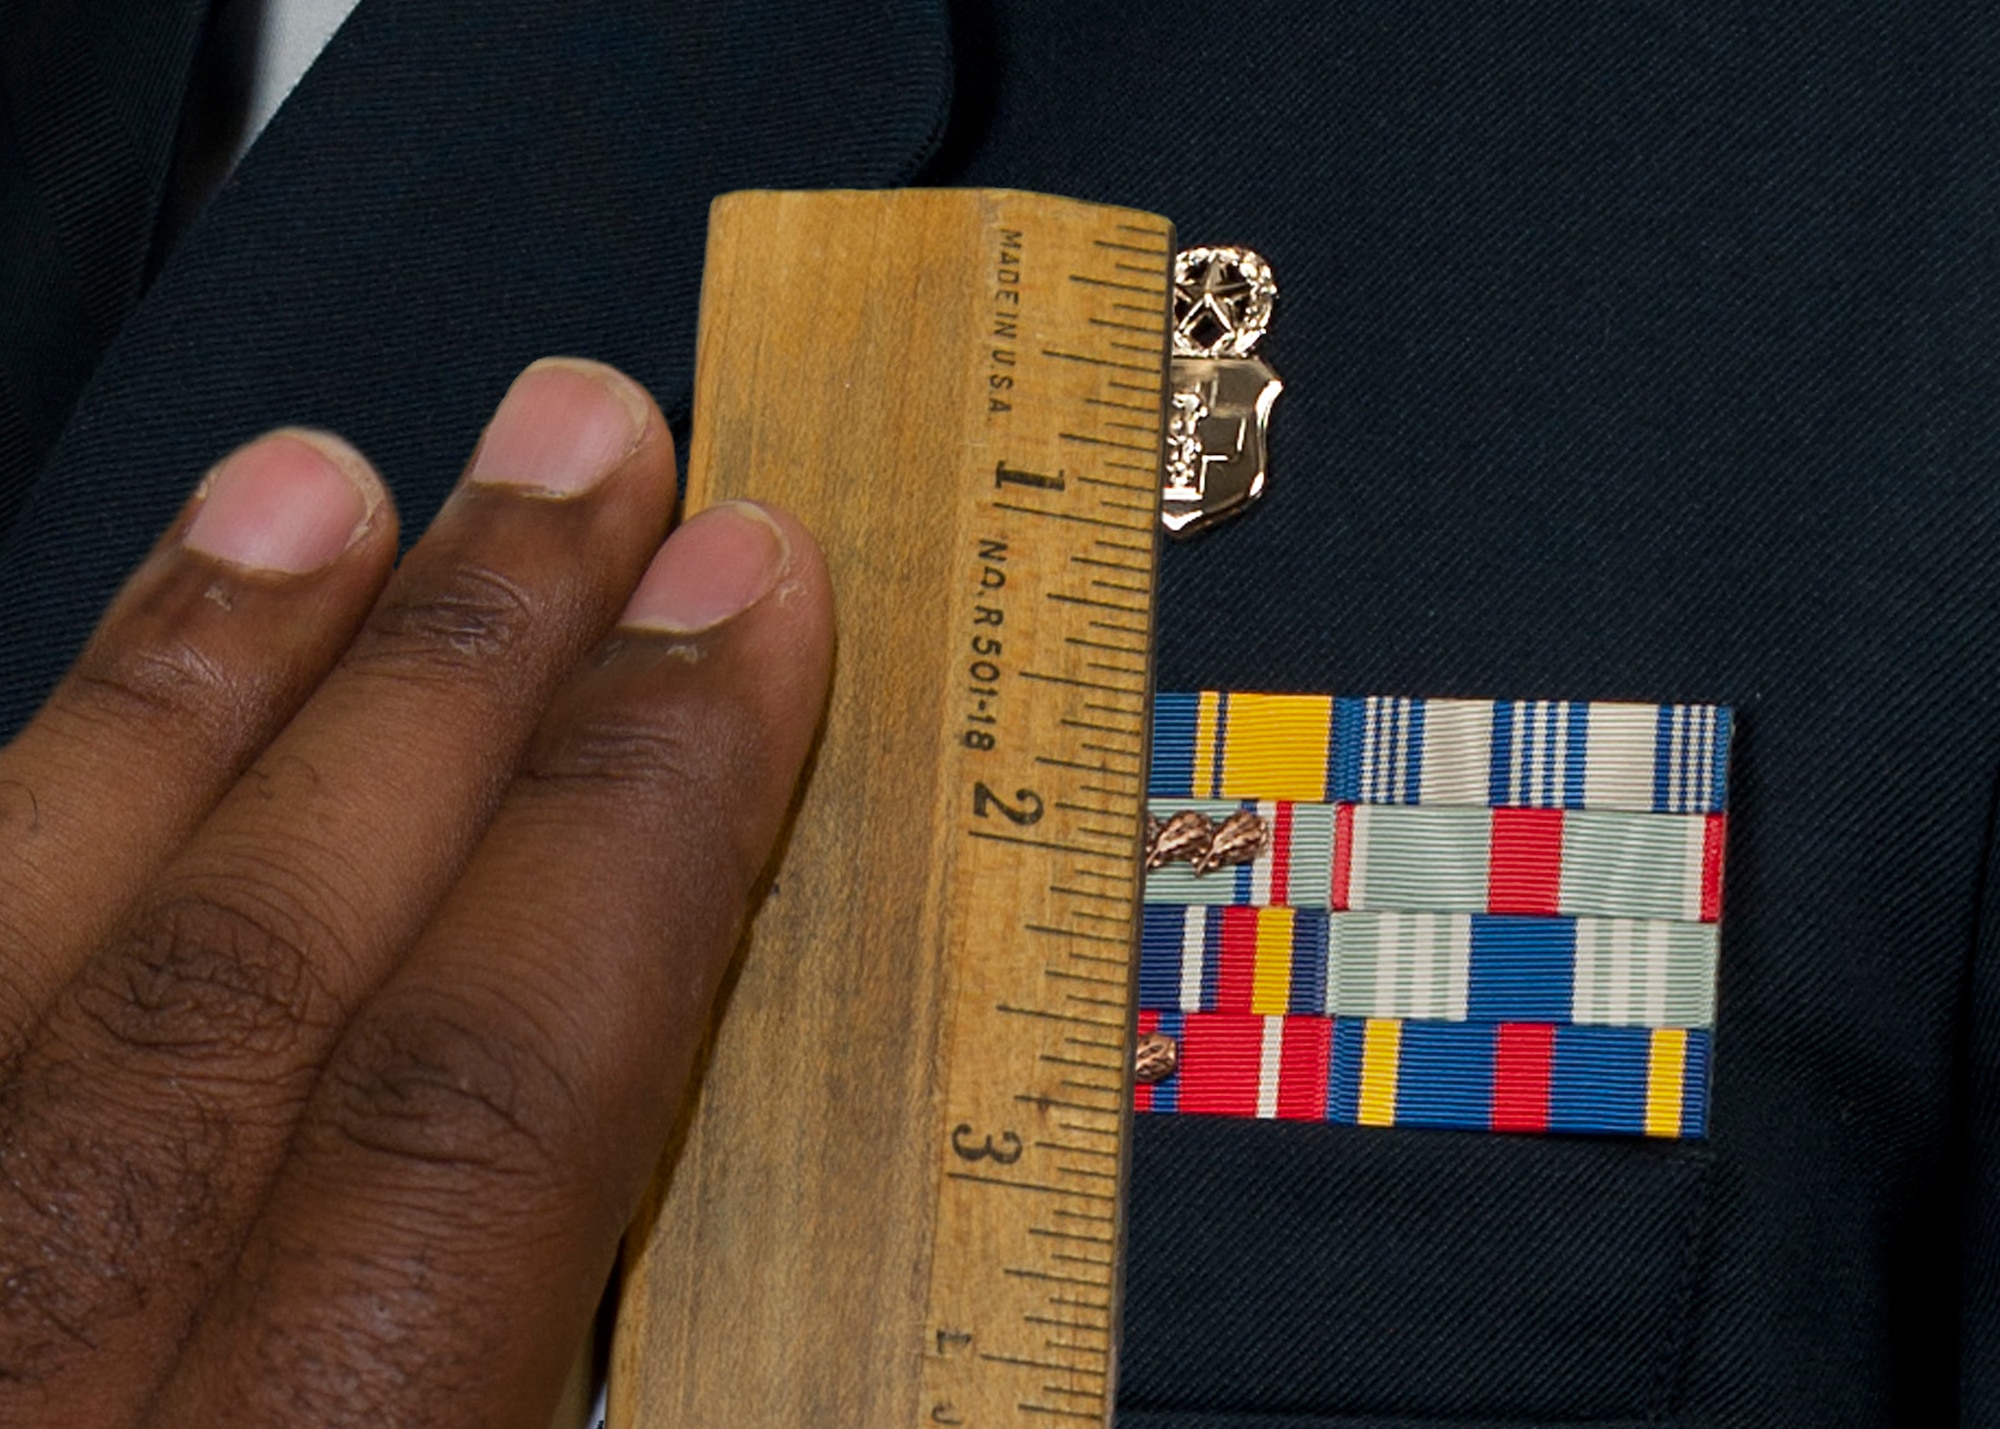 Maintaining a professional appearance at all times while in uniform is every servicemember’s responsibility. Airmen have Air Force Instruction 36-2903, Dress and Personal Appearance, to assist them in sustaining a professional image. (U.S. Air Force photo illustration by Senior Airman Kasey Close/Released)